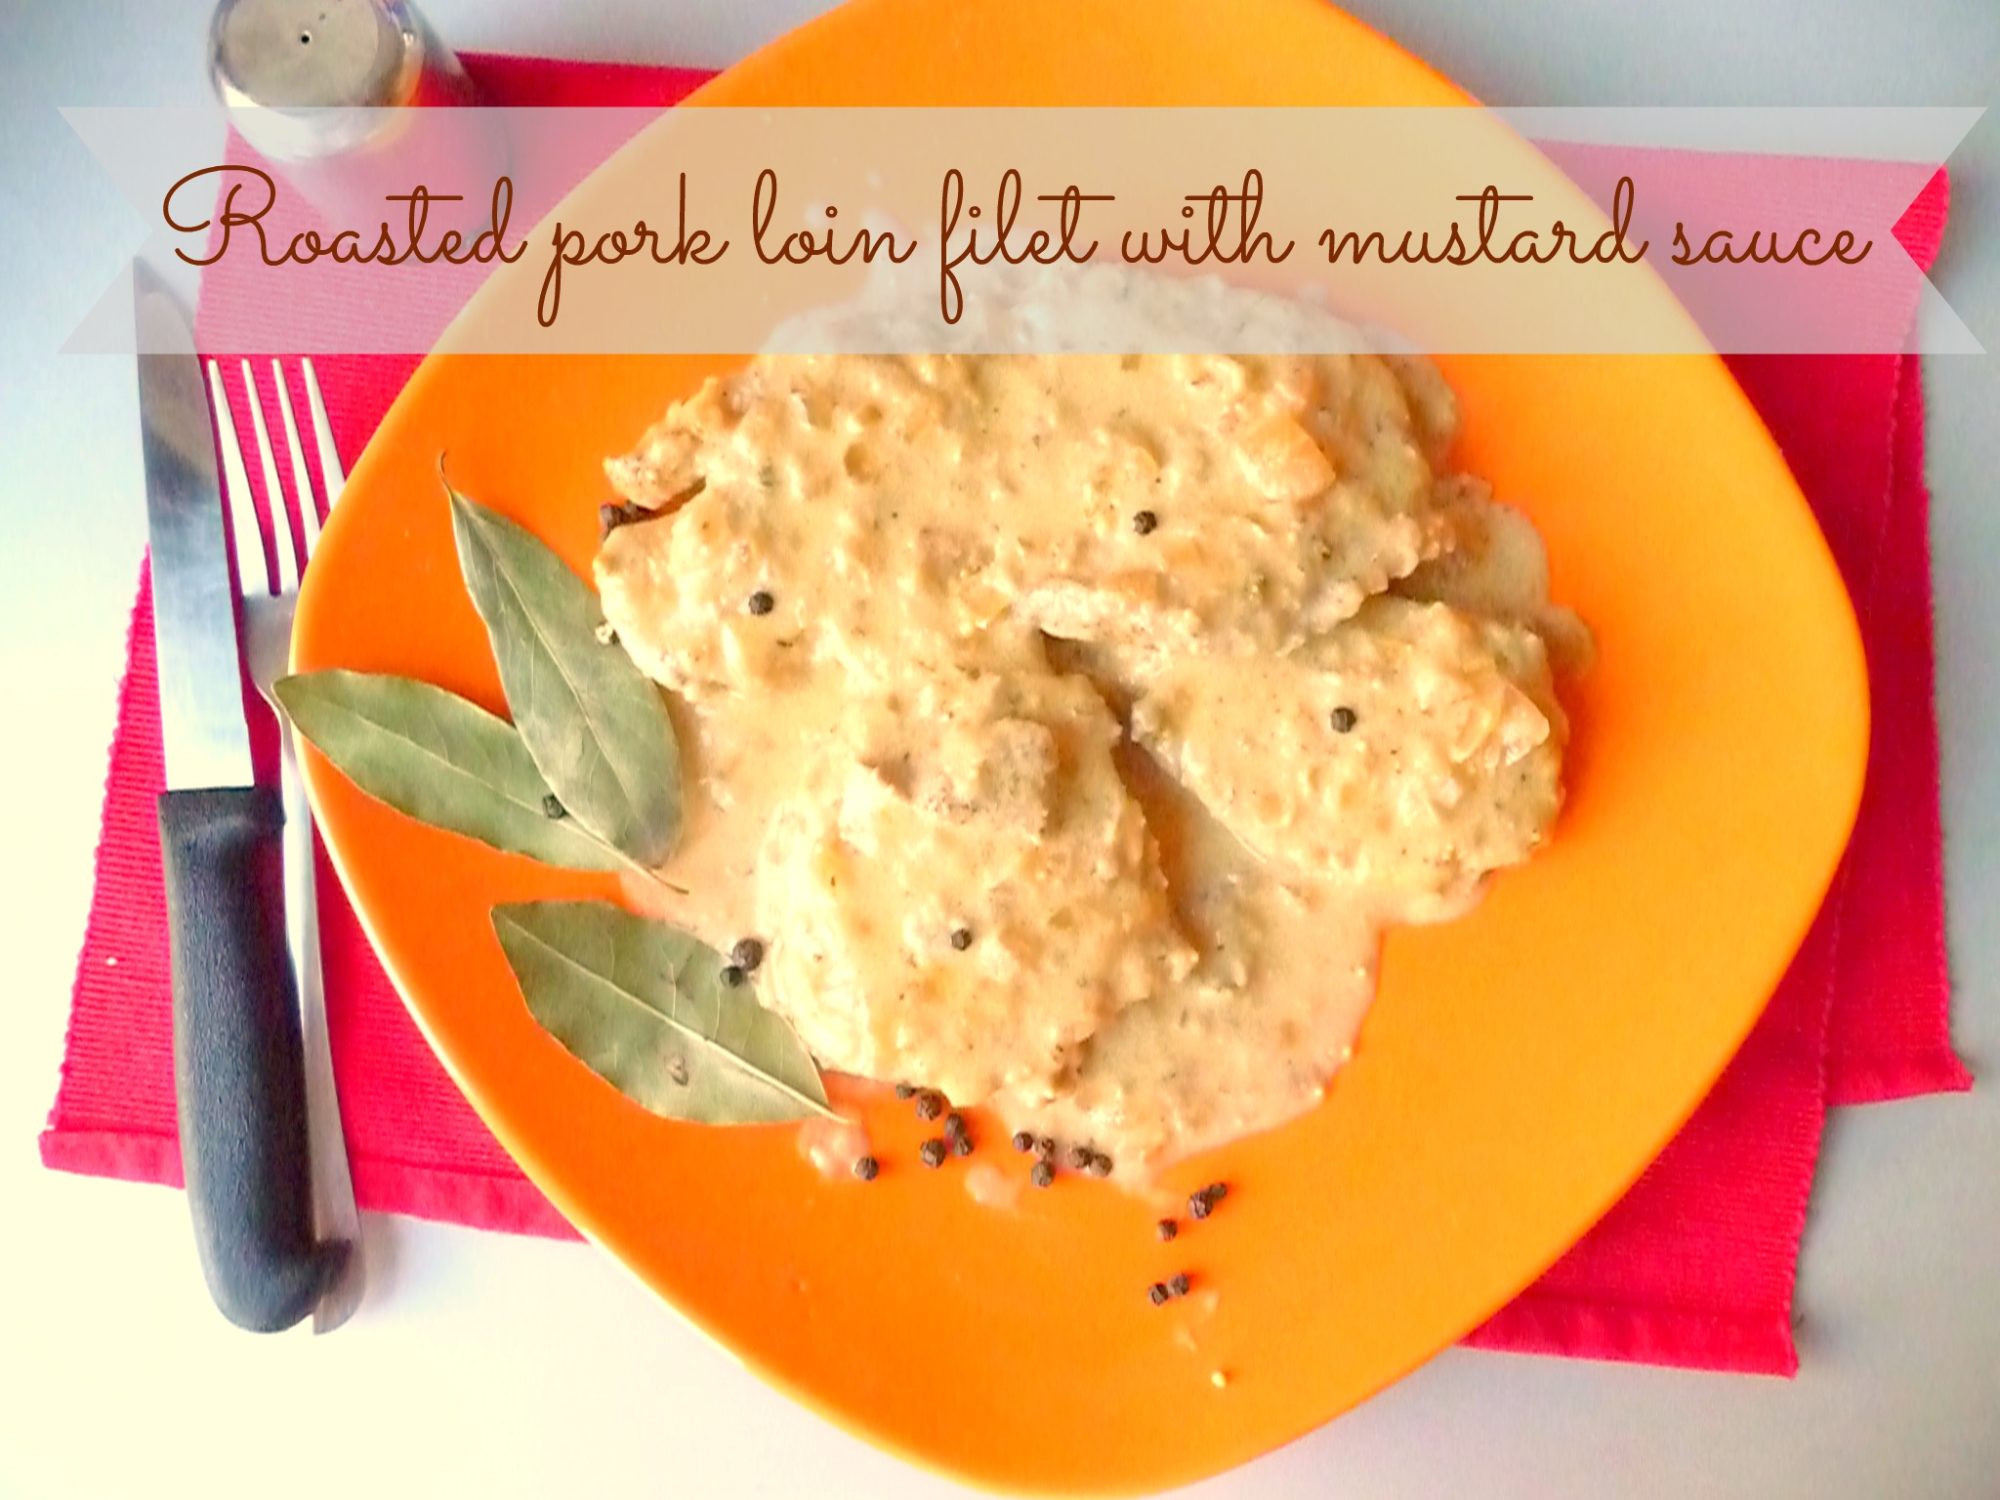 Roasted garlic and herb pork loin filet with mustard sauce